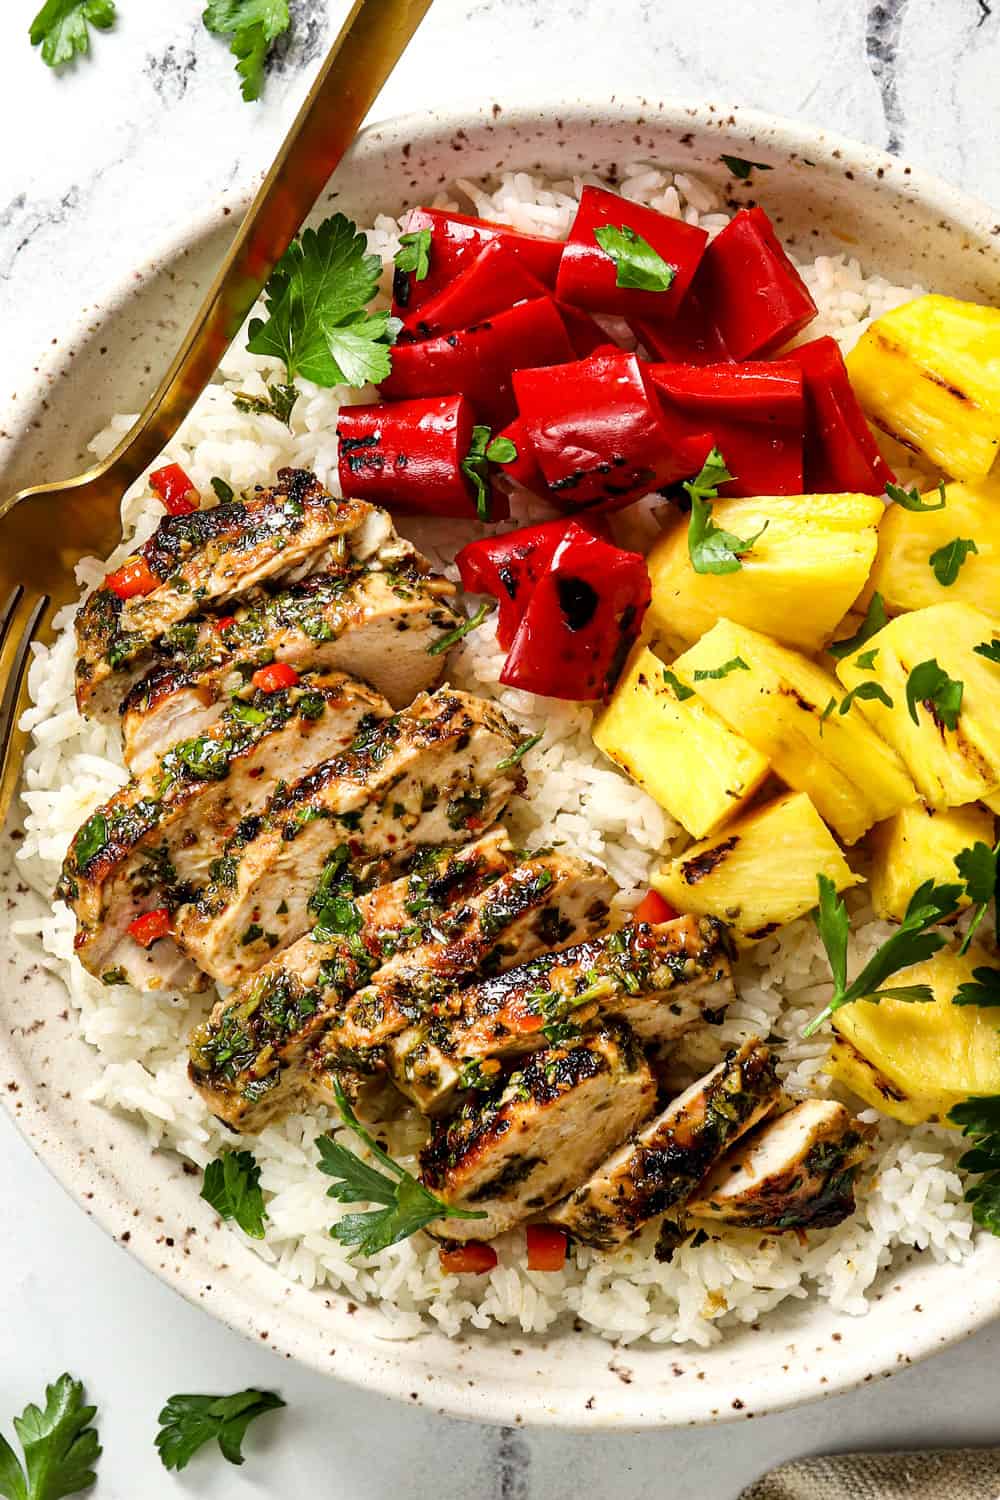 top view showing how to serve chicken chimichurri by adding it to a bowl with rice, pineapple and grilled bell peppers